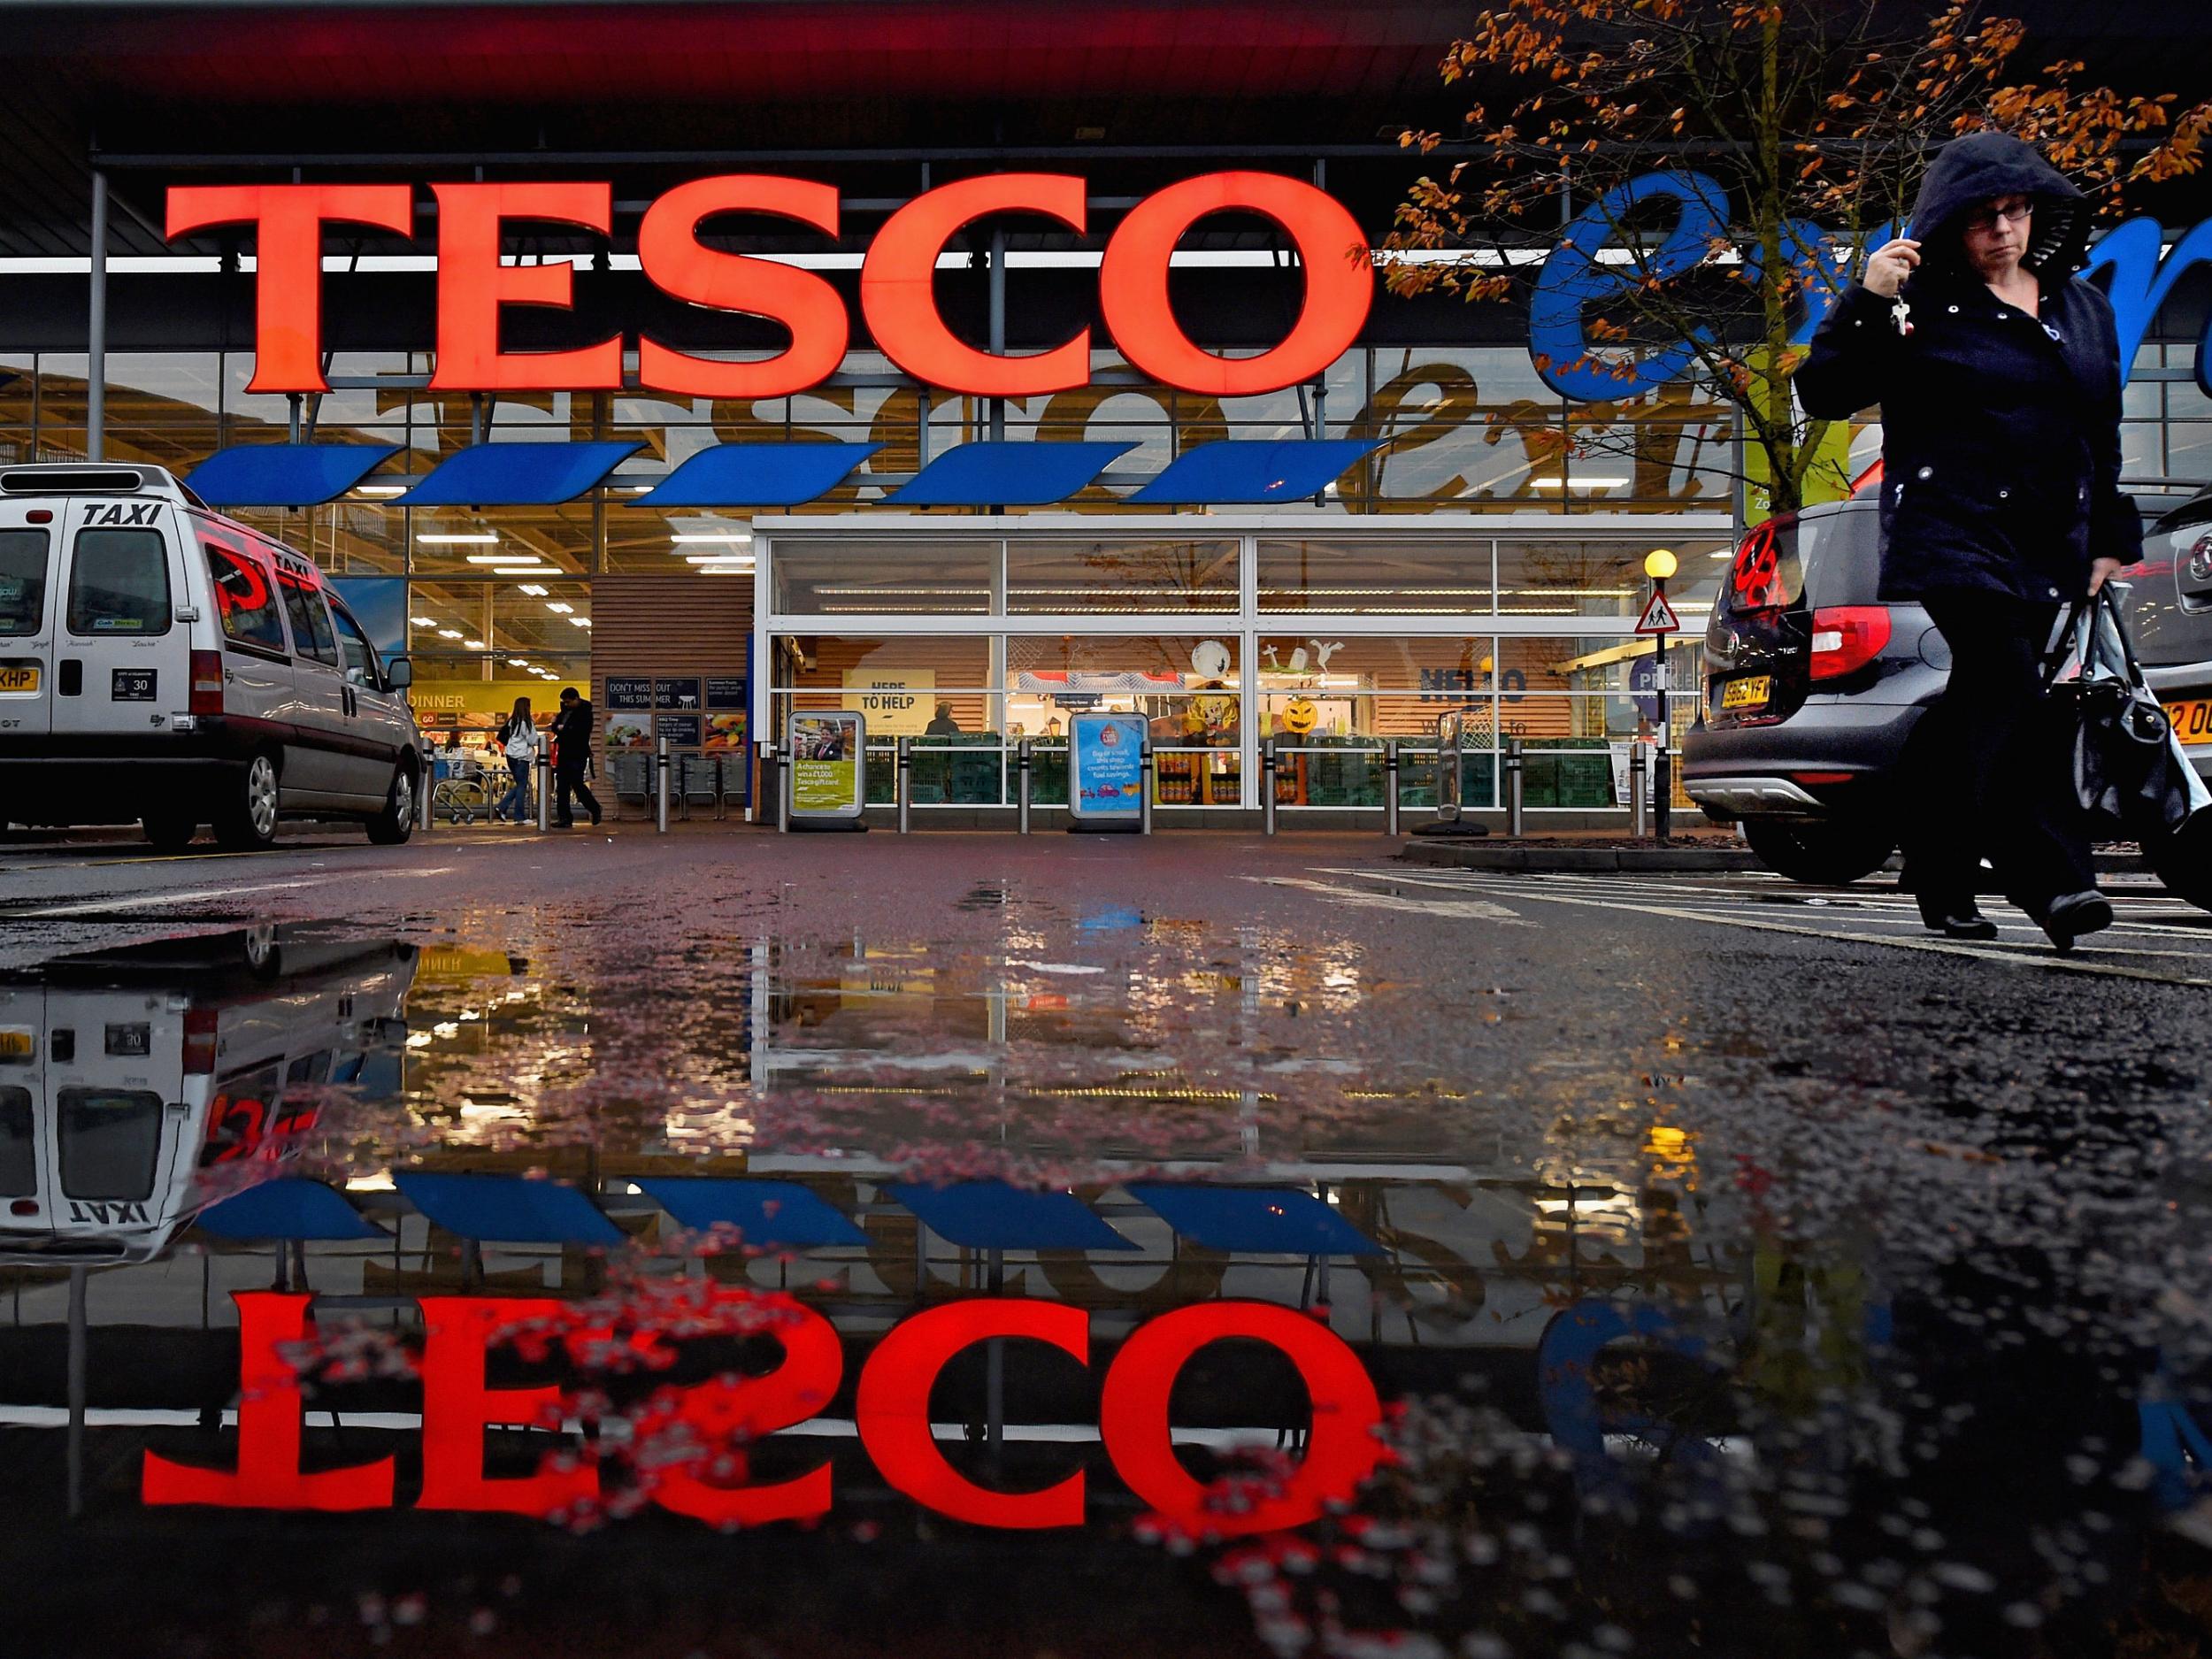 Tesco has had to slash prices to try and entice customers back from German discount chains